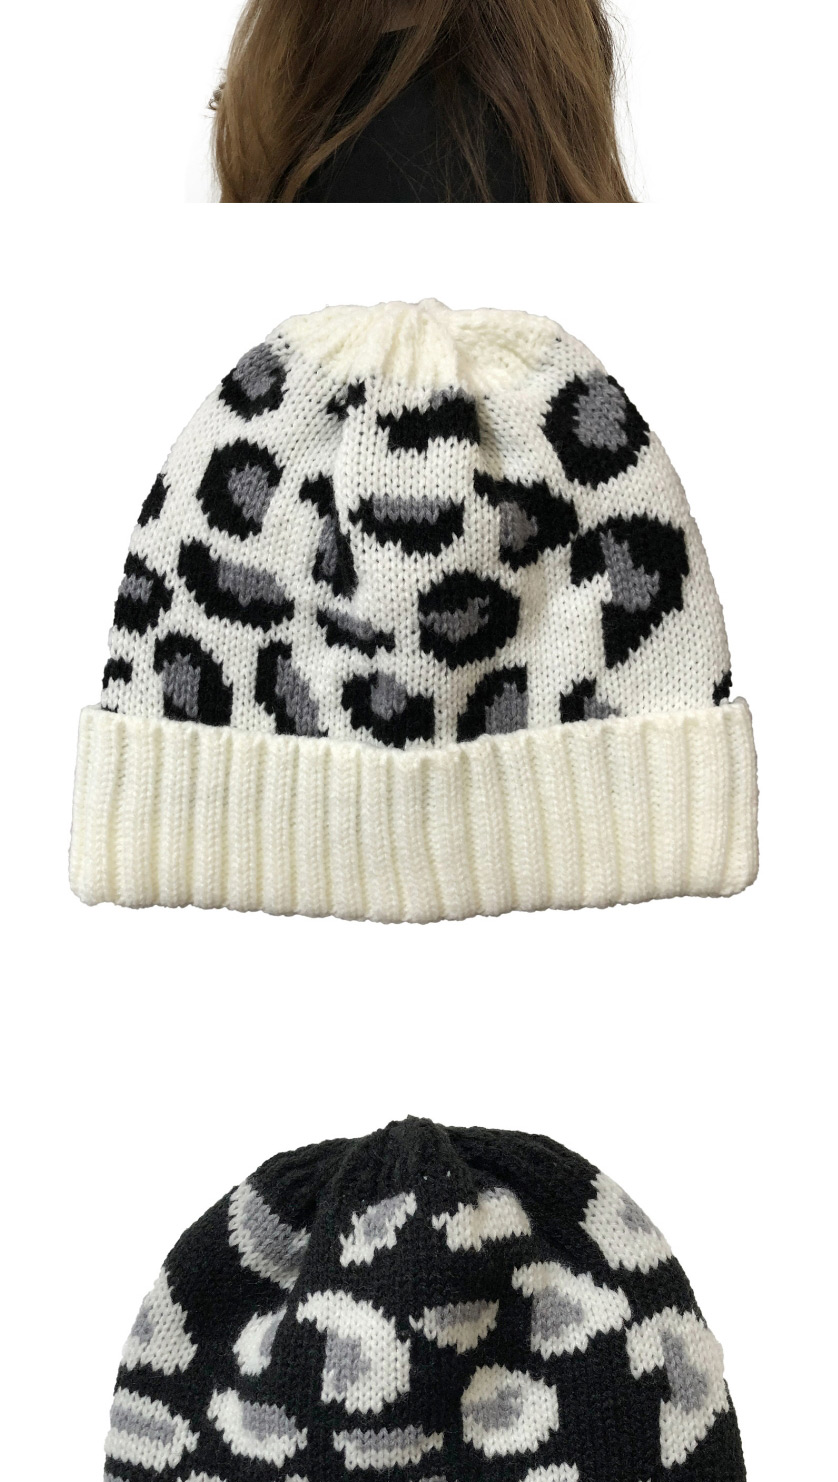 Fashion Camel Leopard Jacquard Knitted Beanie,Knitting Wool Hats